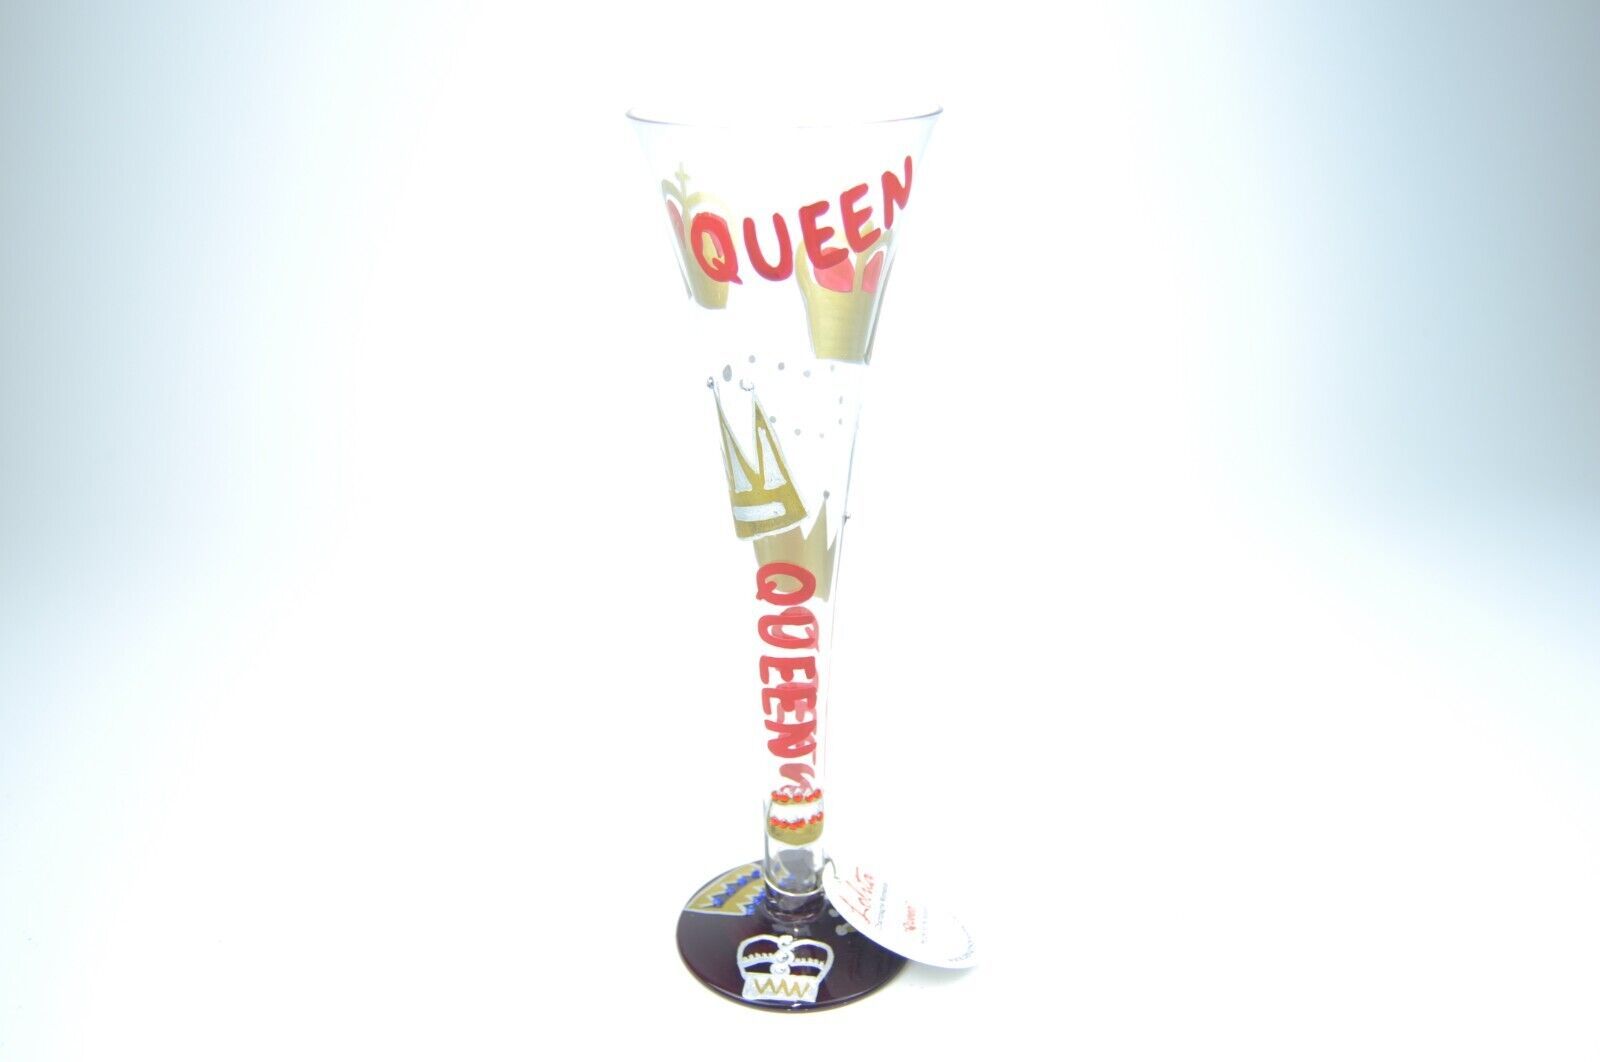 Primary image for Lolita Champagne Moments “Queen” Hand Painted